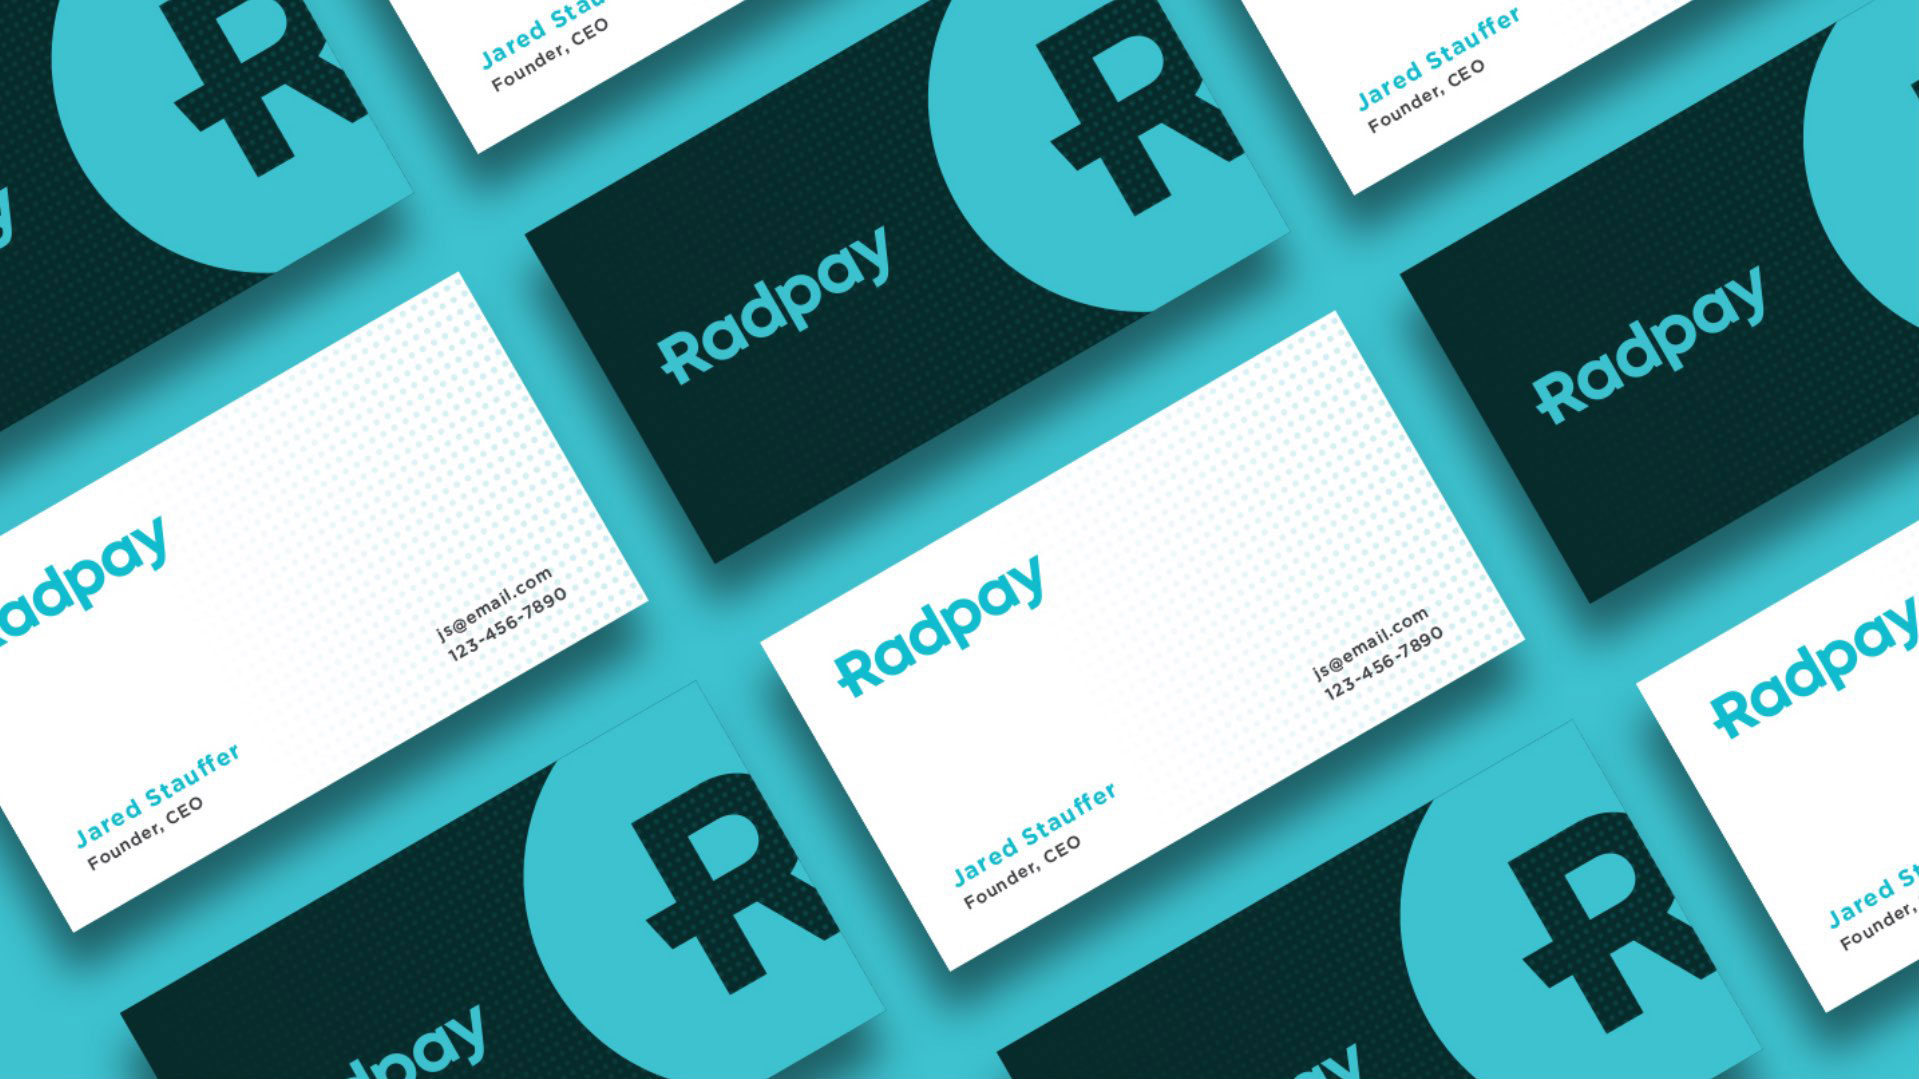 Radpay business cards